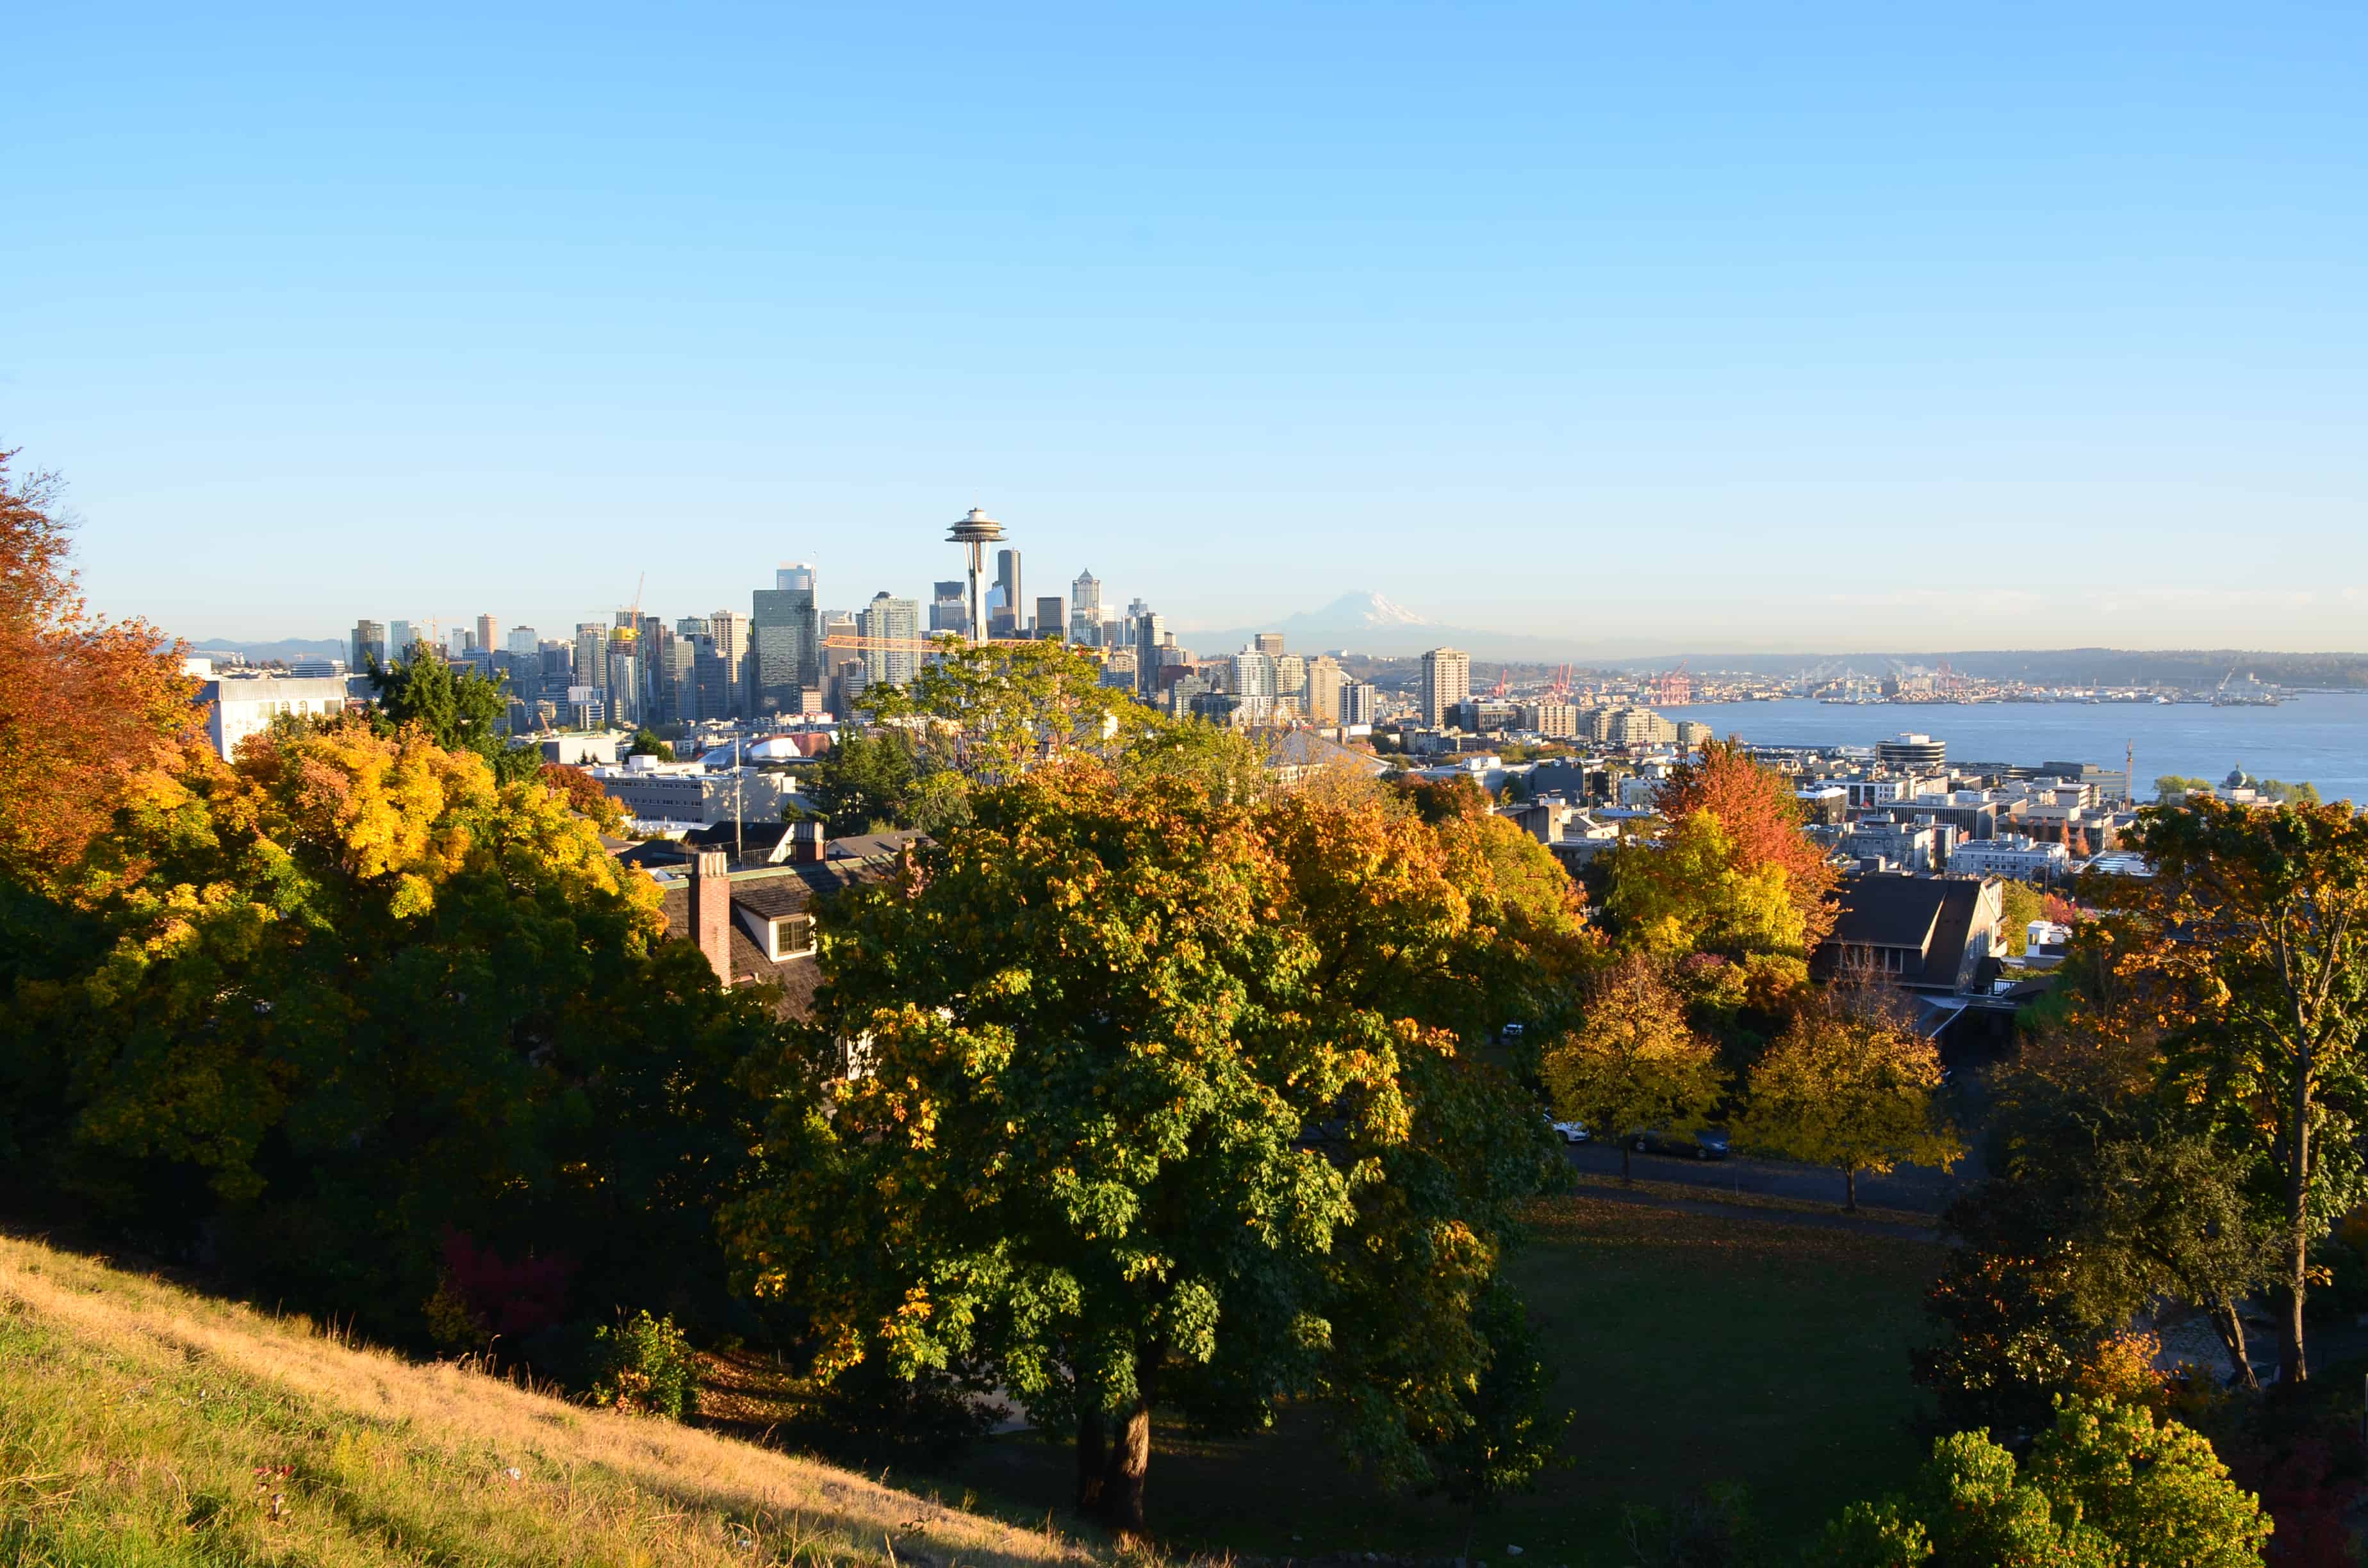 The view from Kerry Park in Seattle, Washington